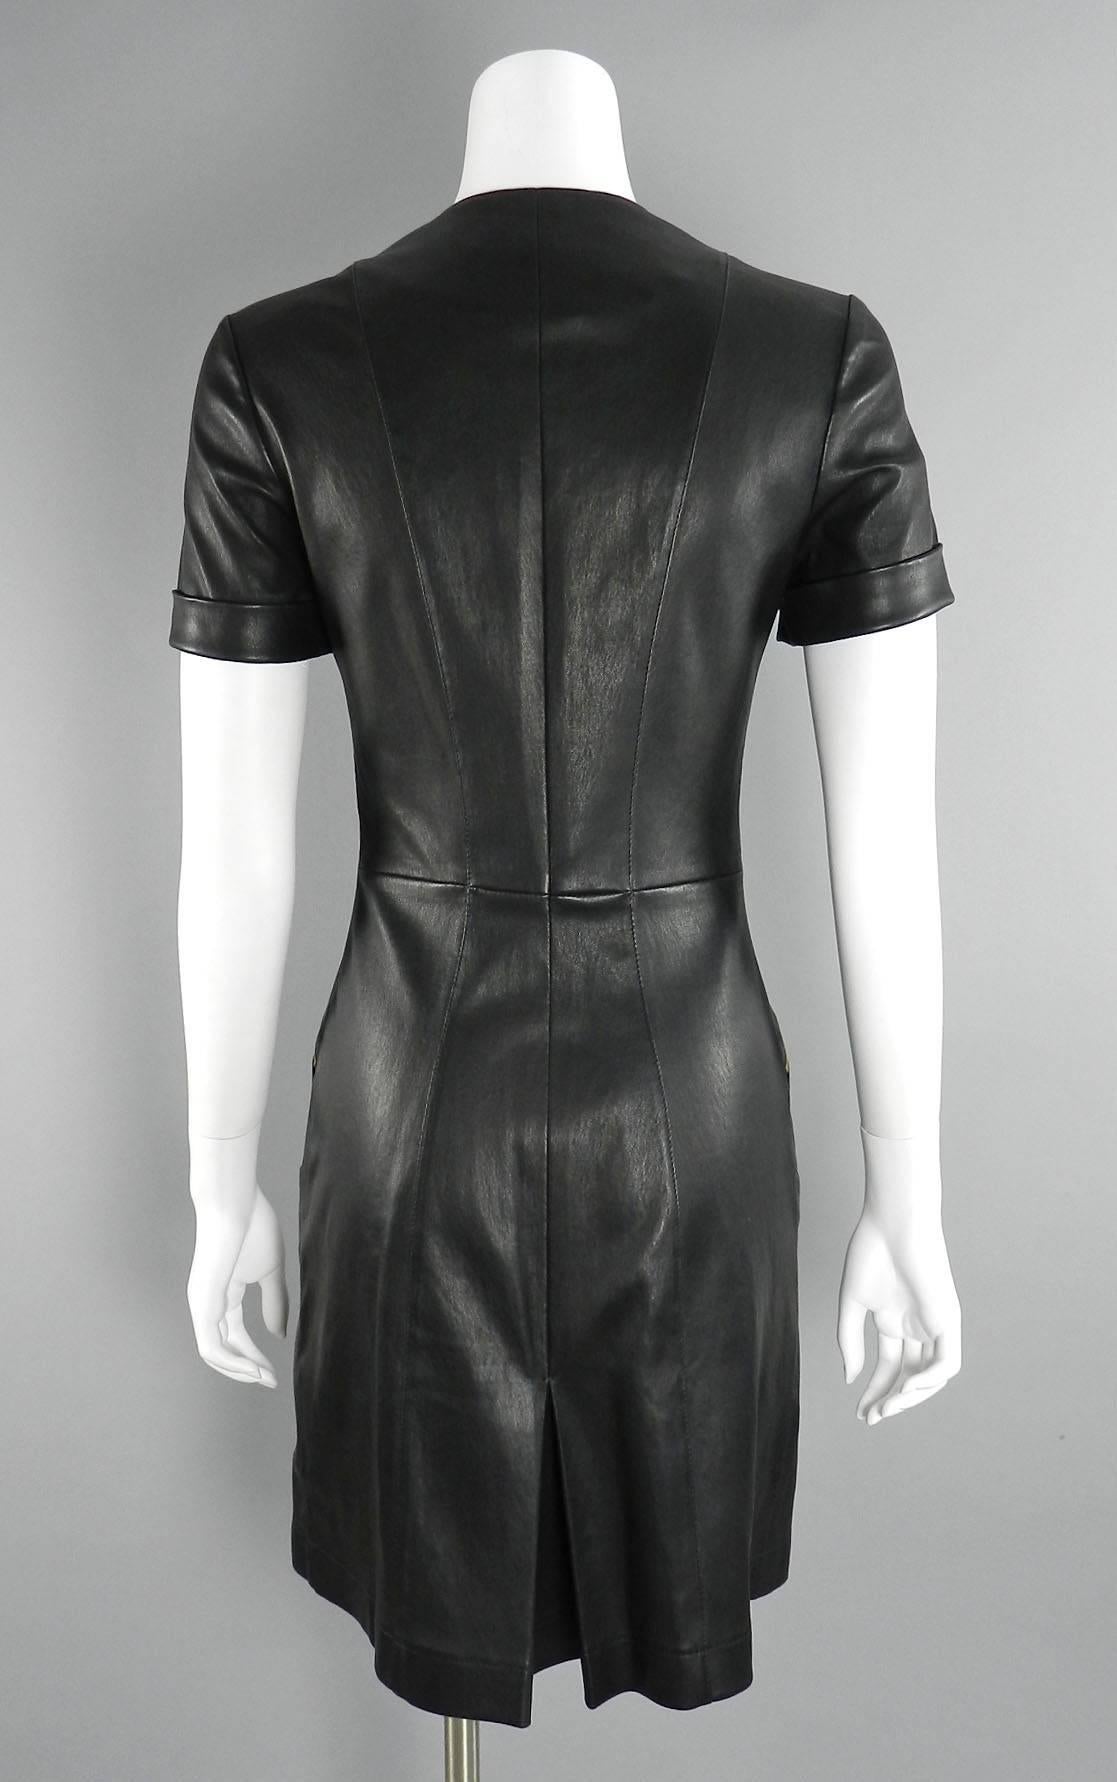 Women's Louis Vuitton Black Stretch Leather Dress with Gold Zippers